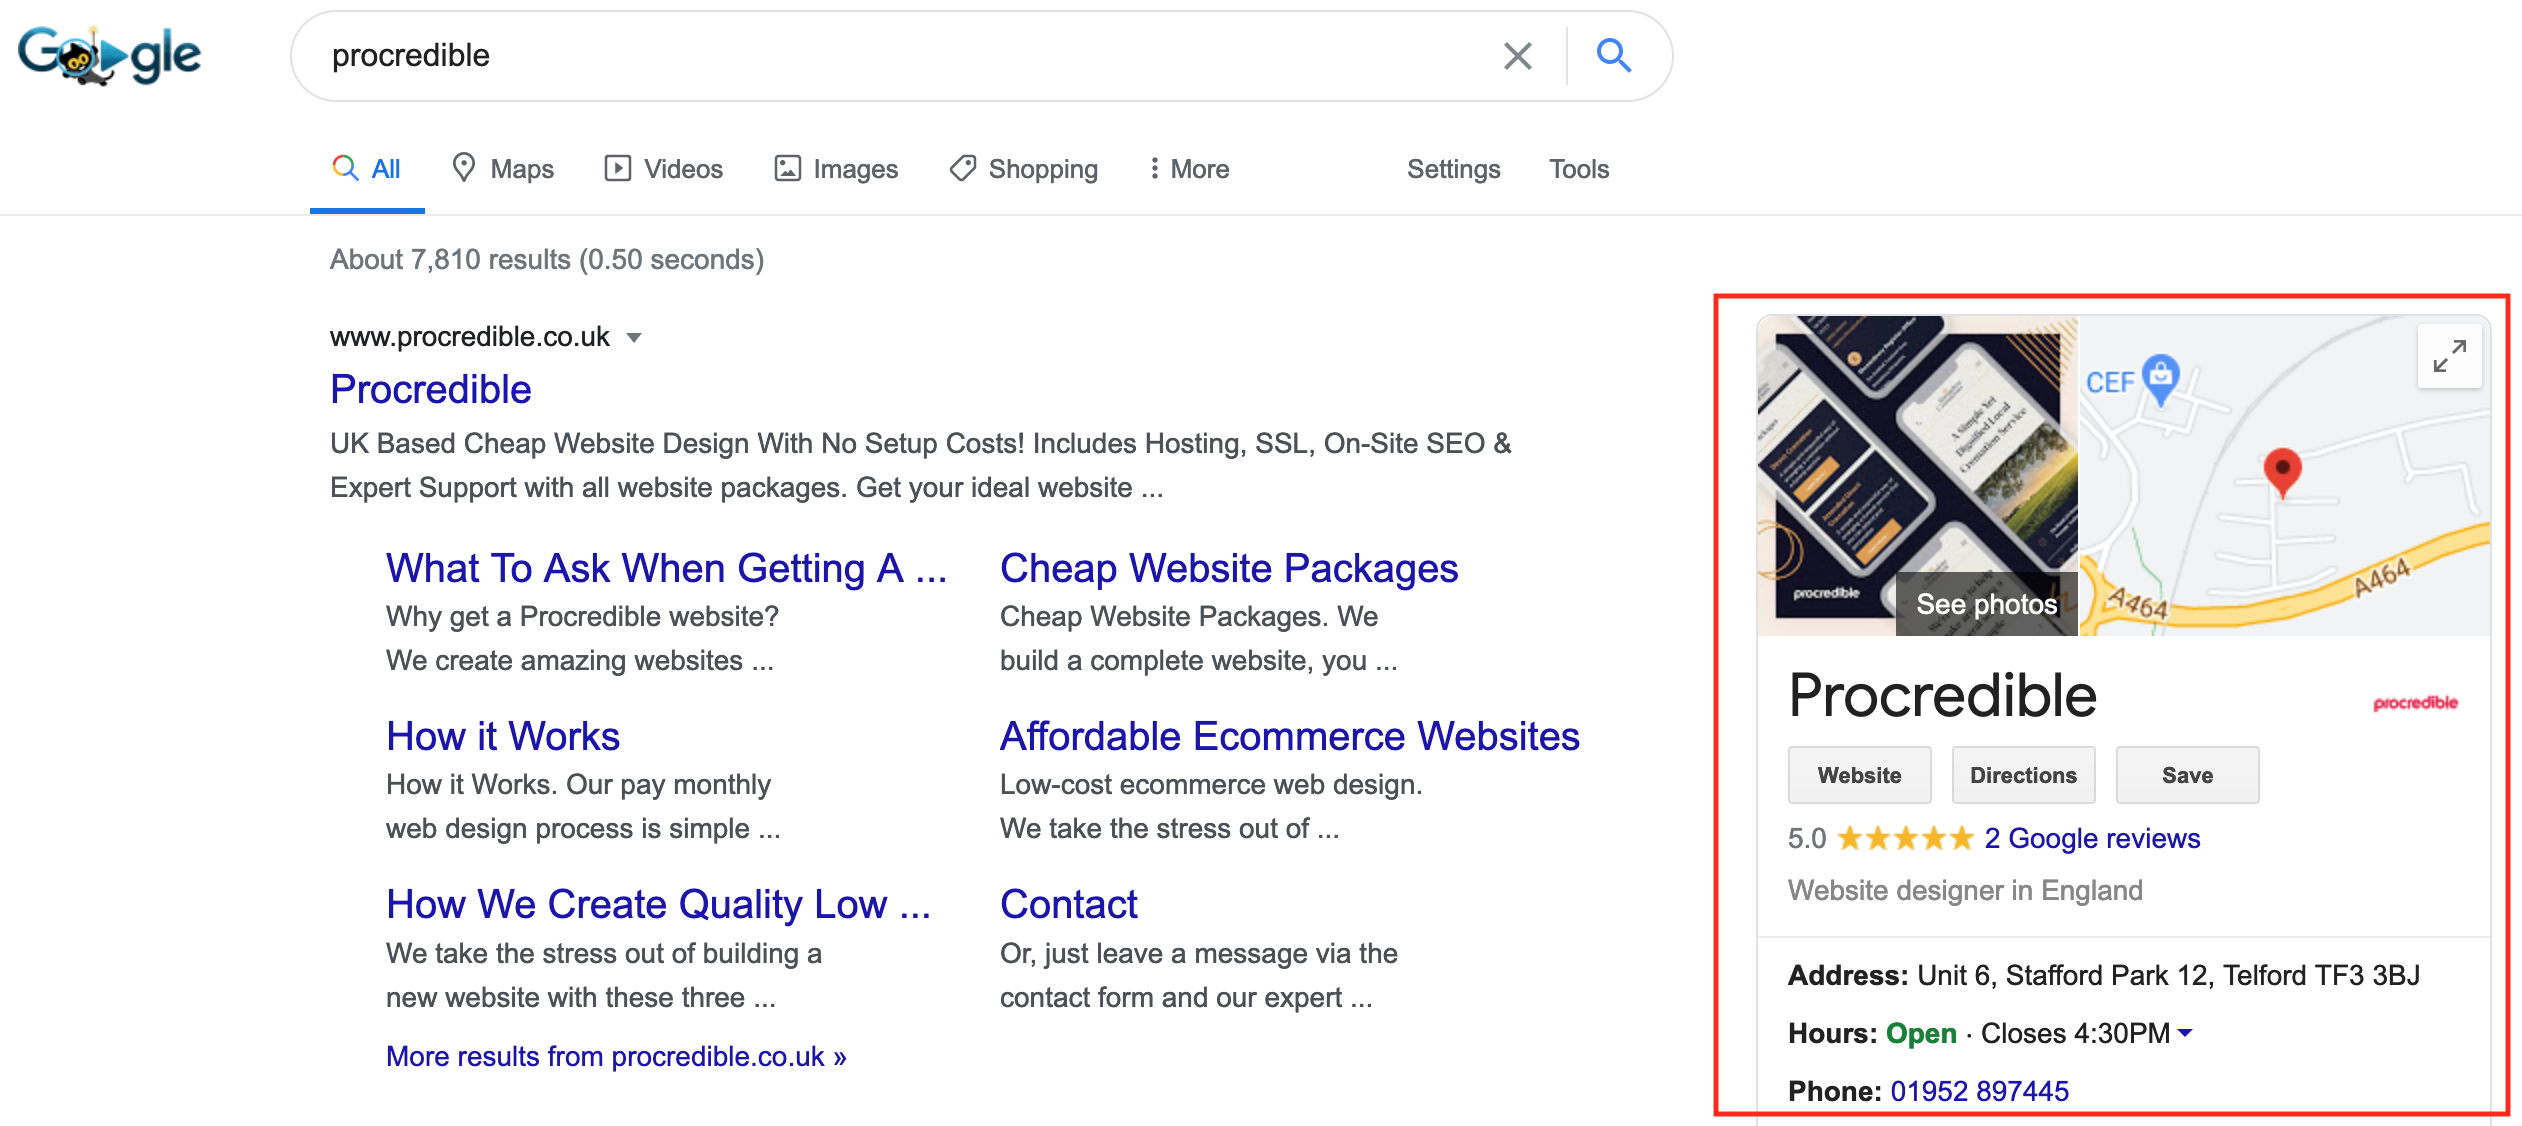 Google-business-information-example